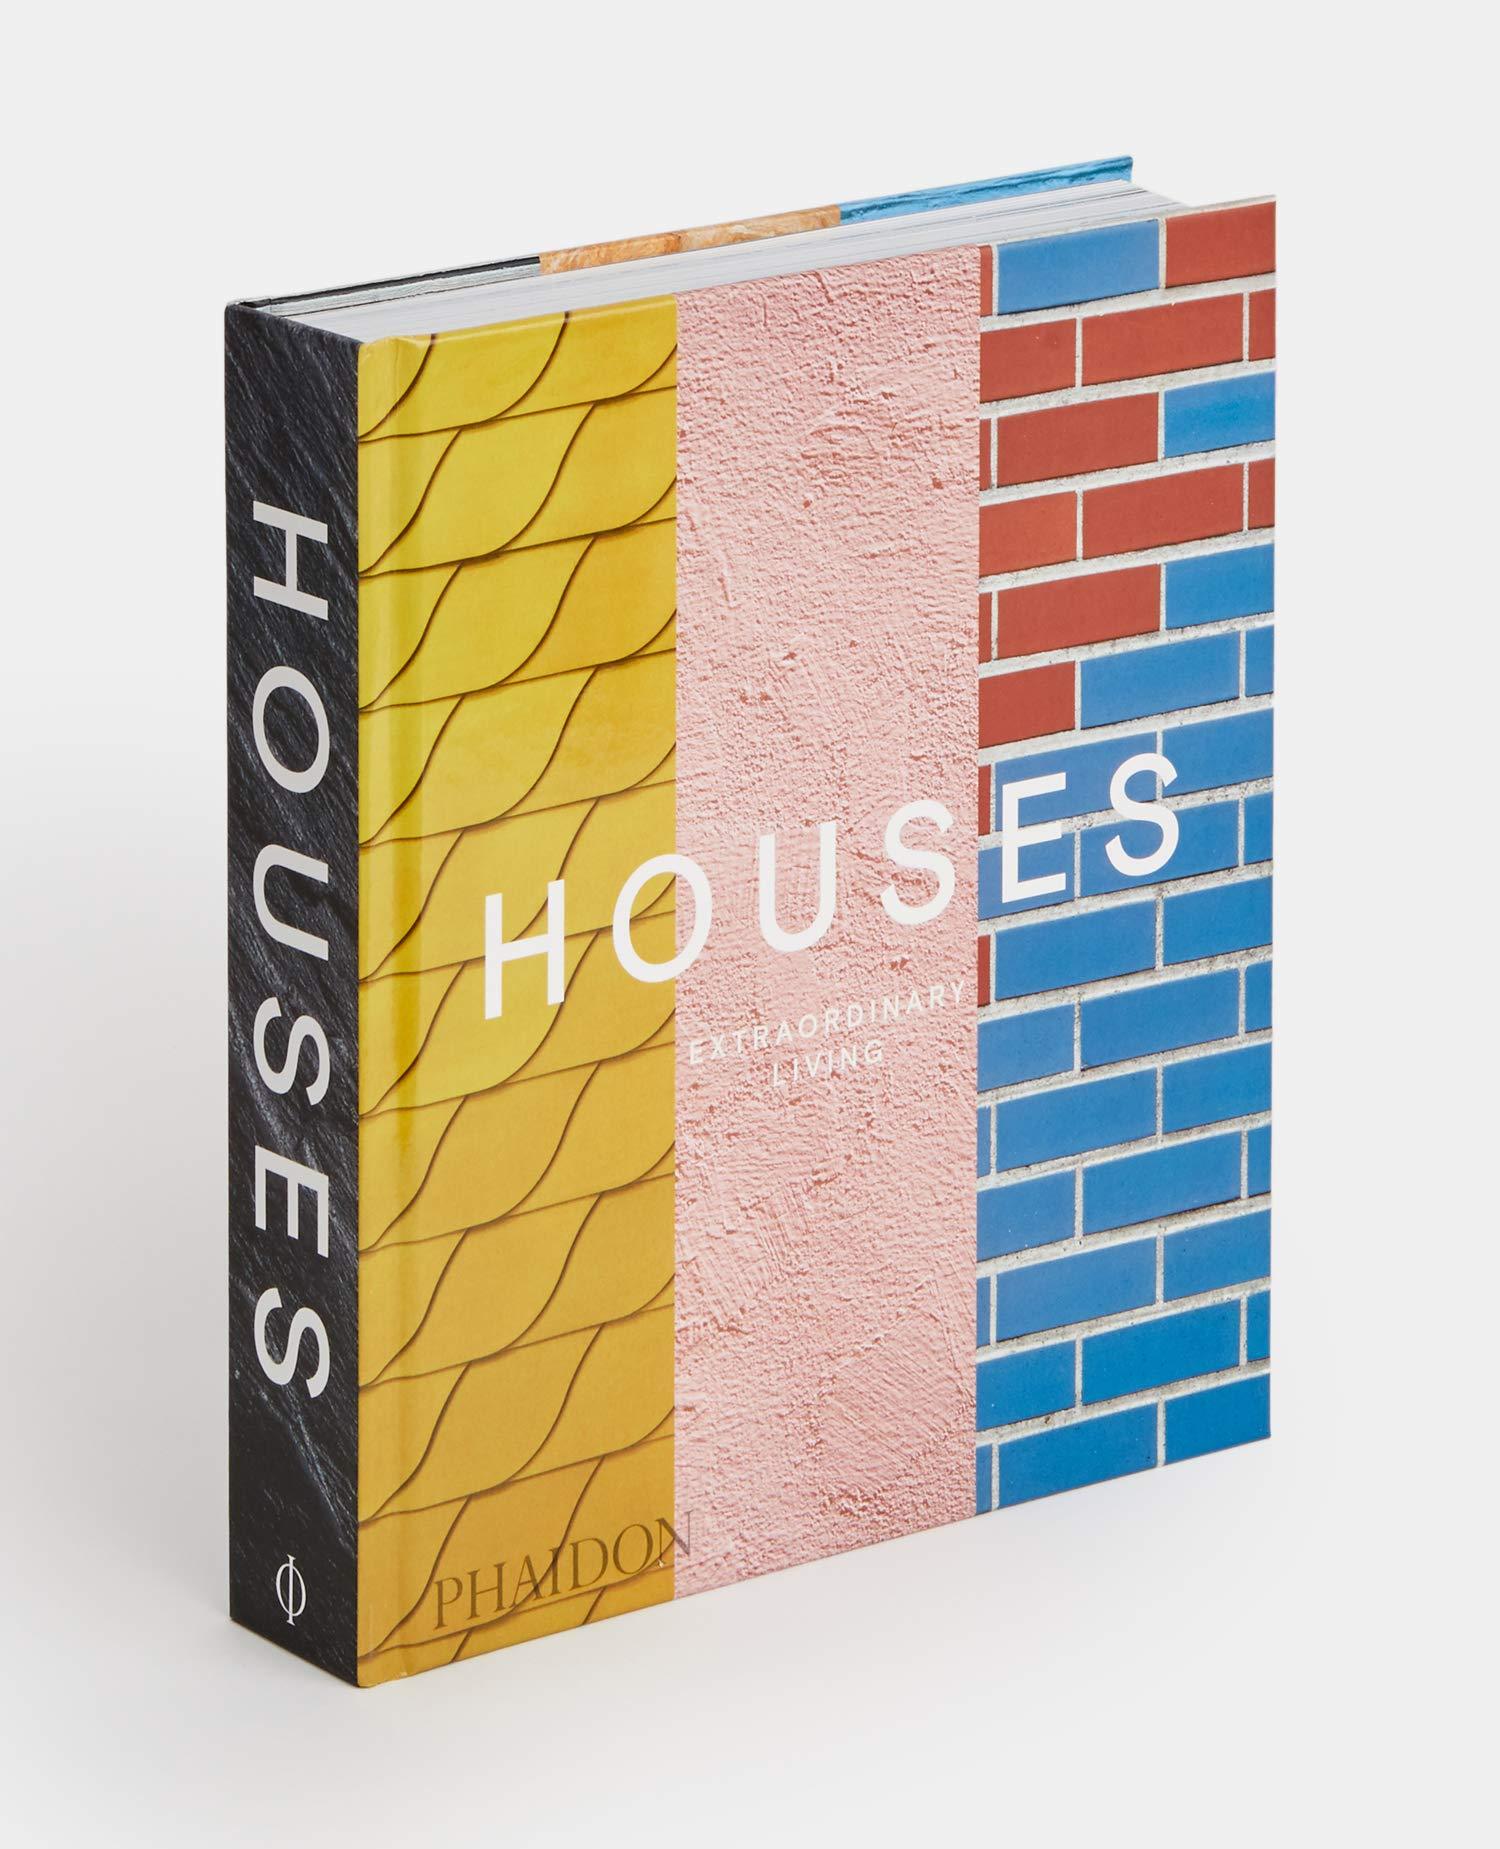 Houses: Extraordinary living phaidon editors (Hardcover)
In stock in Los Angeles

The world's most innovative and influential architect-designed houses created since the early 20th century

Throughout history, houses have presented architects